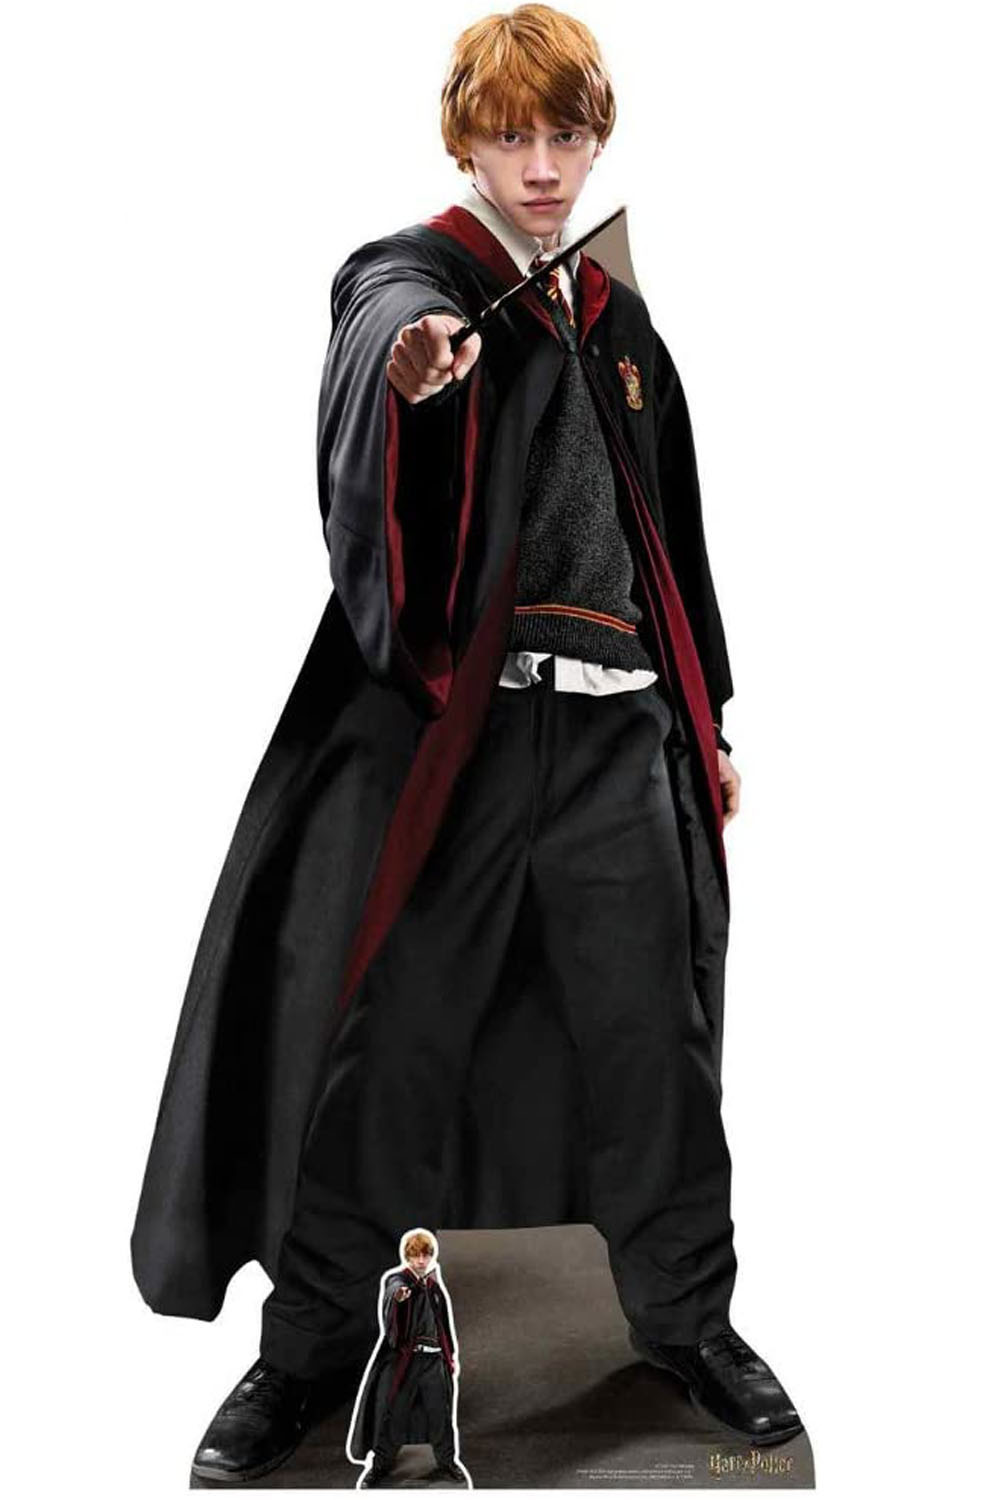 https://cdn11.bigcommerce.com/s-ydriczk/images/stencil/1500x1500/products/90183/98291/ron-weasley-holding-wand-Harry-Potter-Cardboard-Cutout-buy-now-at-starstills__75179.1685632415.jpg?c=2&imbypass=on